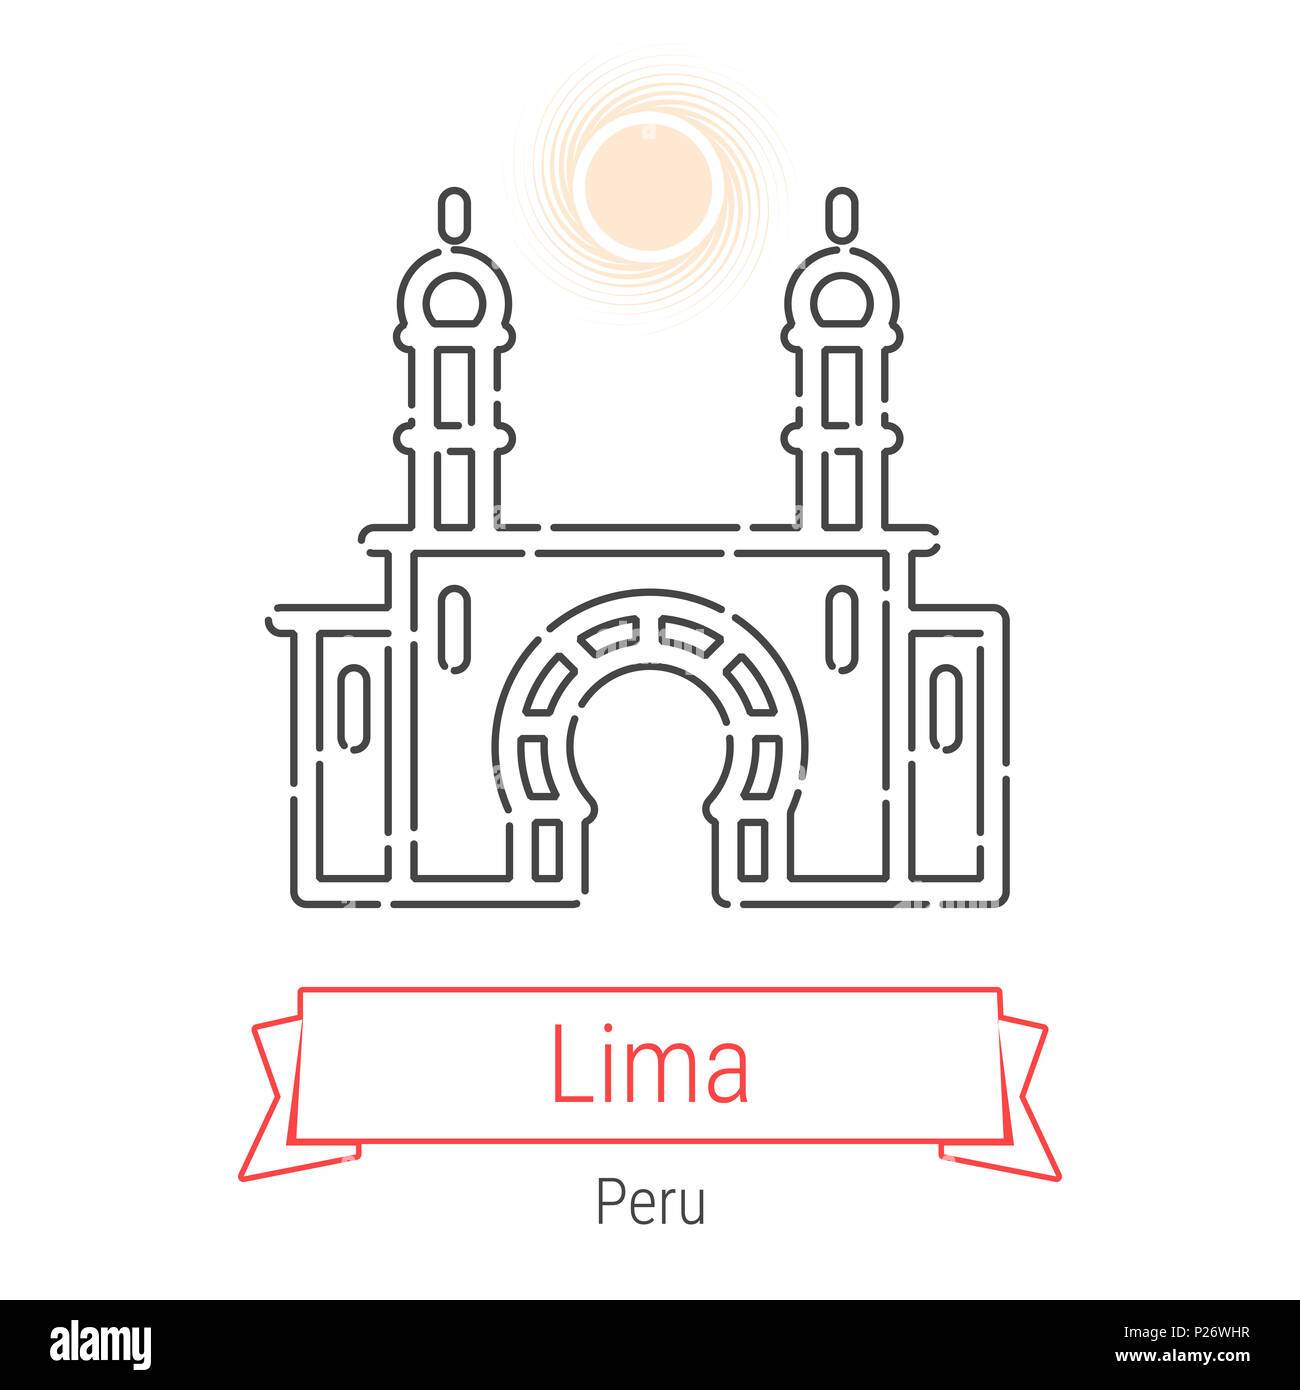 Lima, Peru Line Icon with Red Ribbon Isolated on White. Lima Landmark - Emblem - Print - Label - Symbol. Park of Friendship Pictogram. World Cities Co Stock Photo